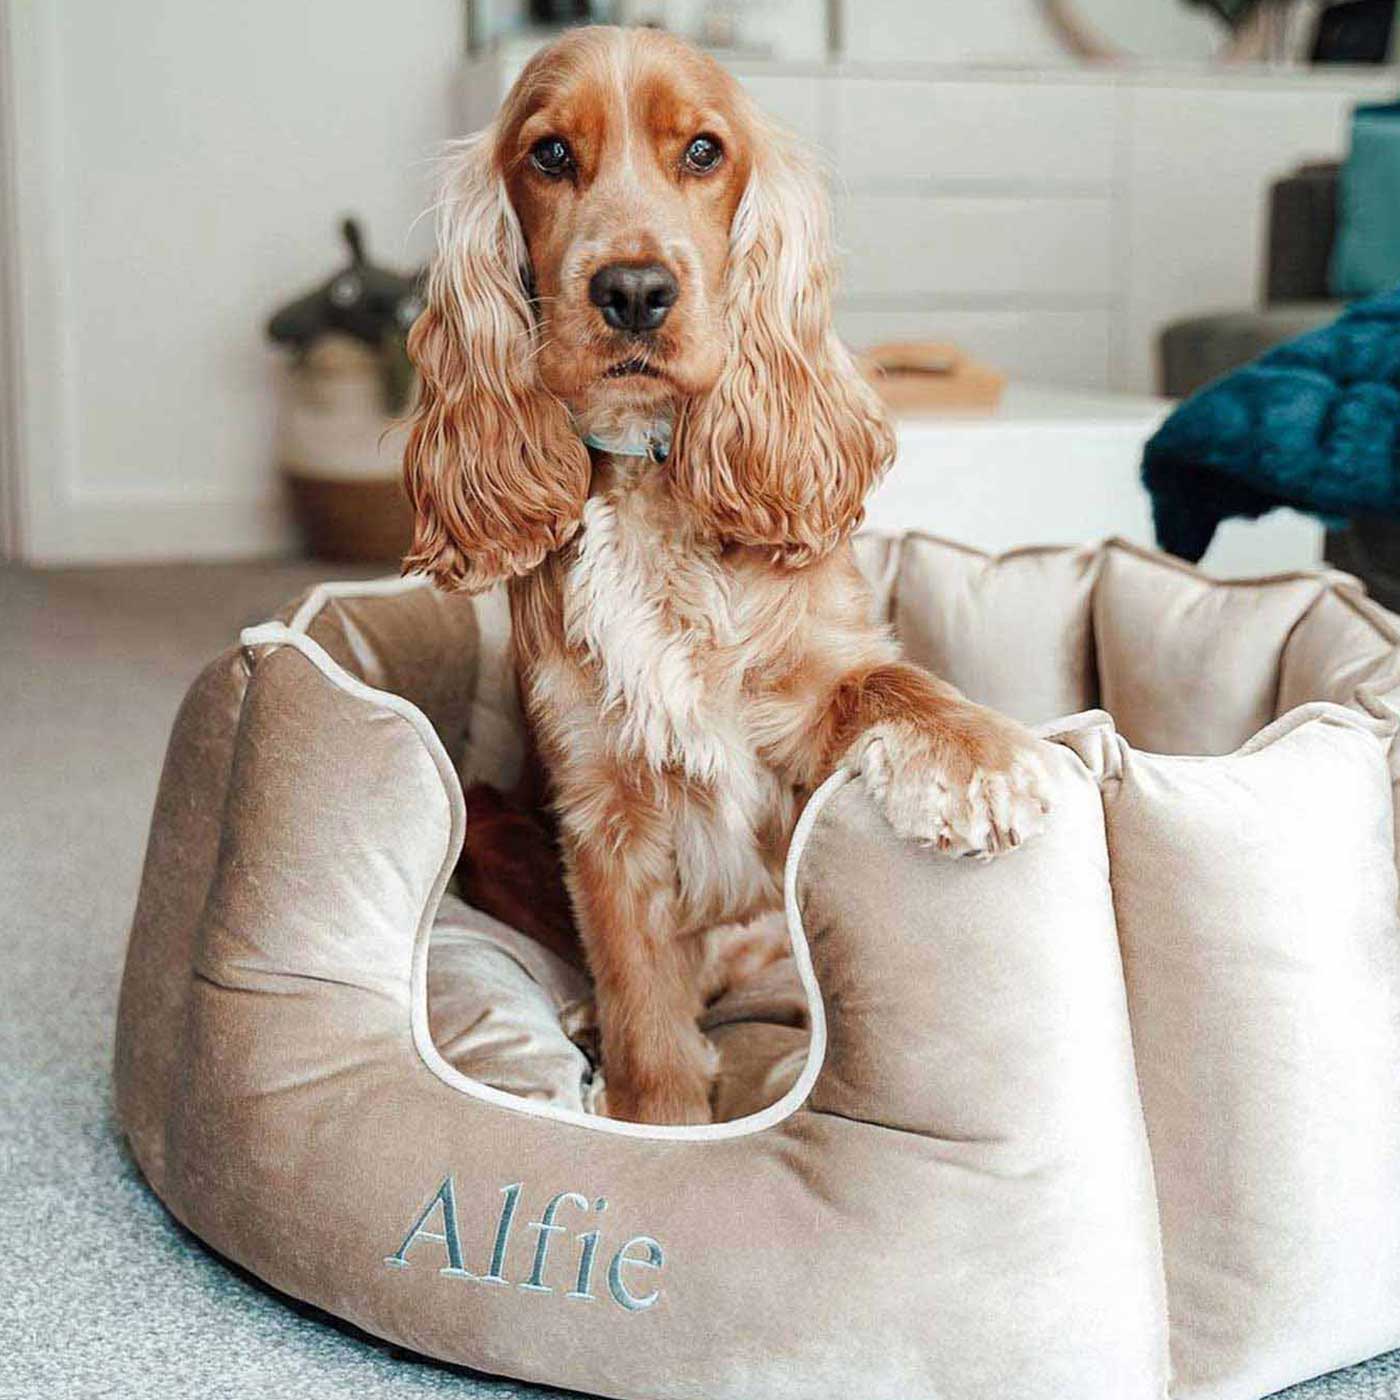 Discover Our Luxurious High Wall Velvet Bed For Dogs, Featuring inner pillow with plush teddy fleece on one side To Craft The Perfect Dogs Bed In Stunning Mushroom Velvet! Available To Personalize Now at Lords & Labradors US